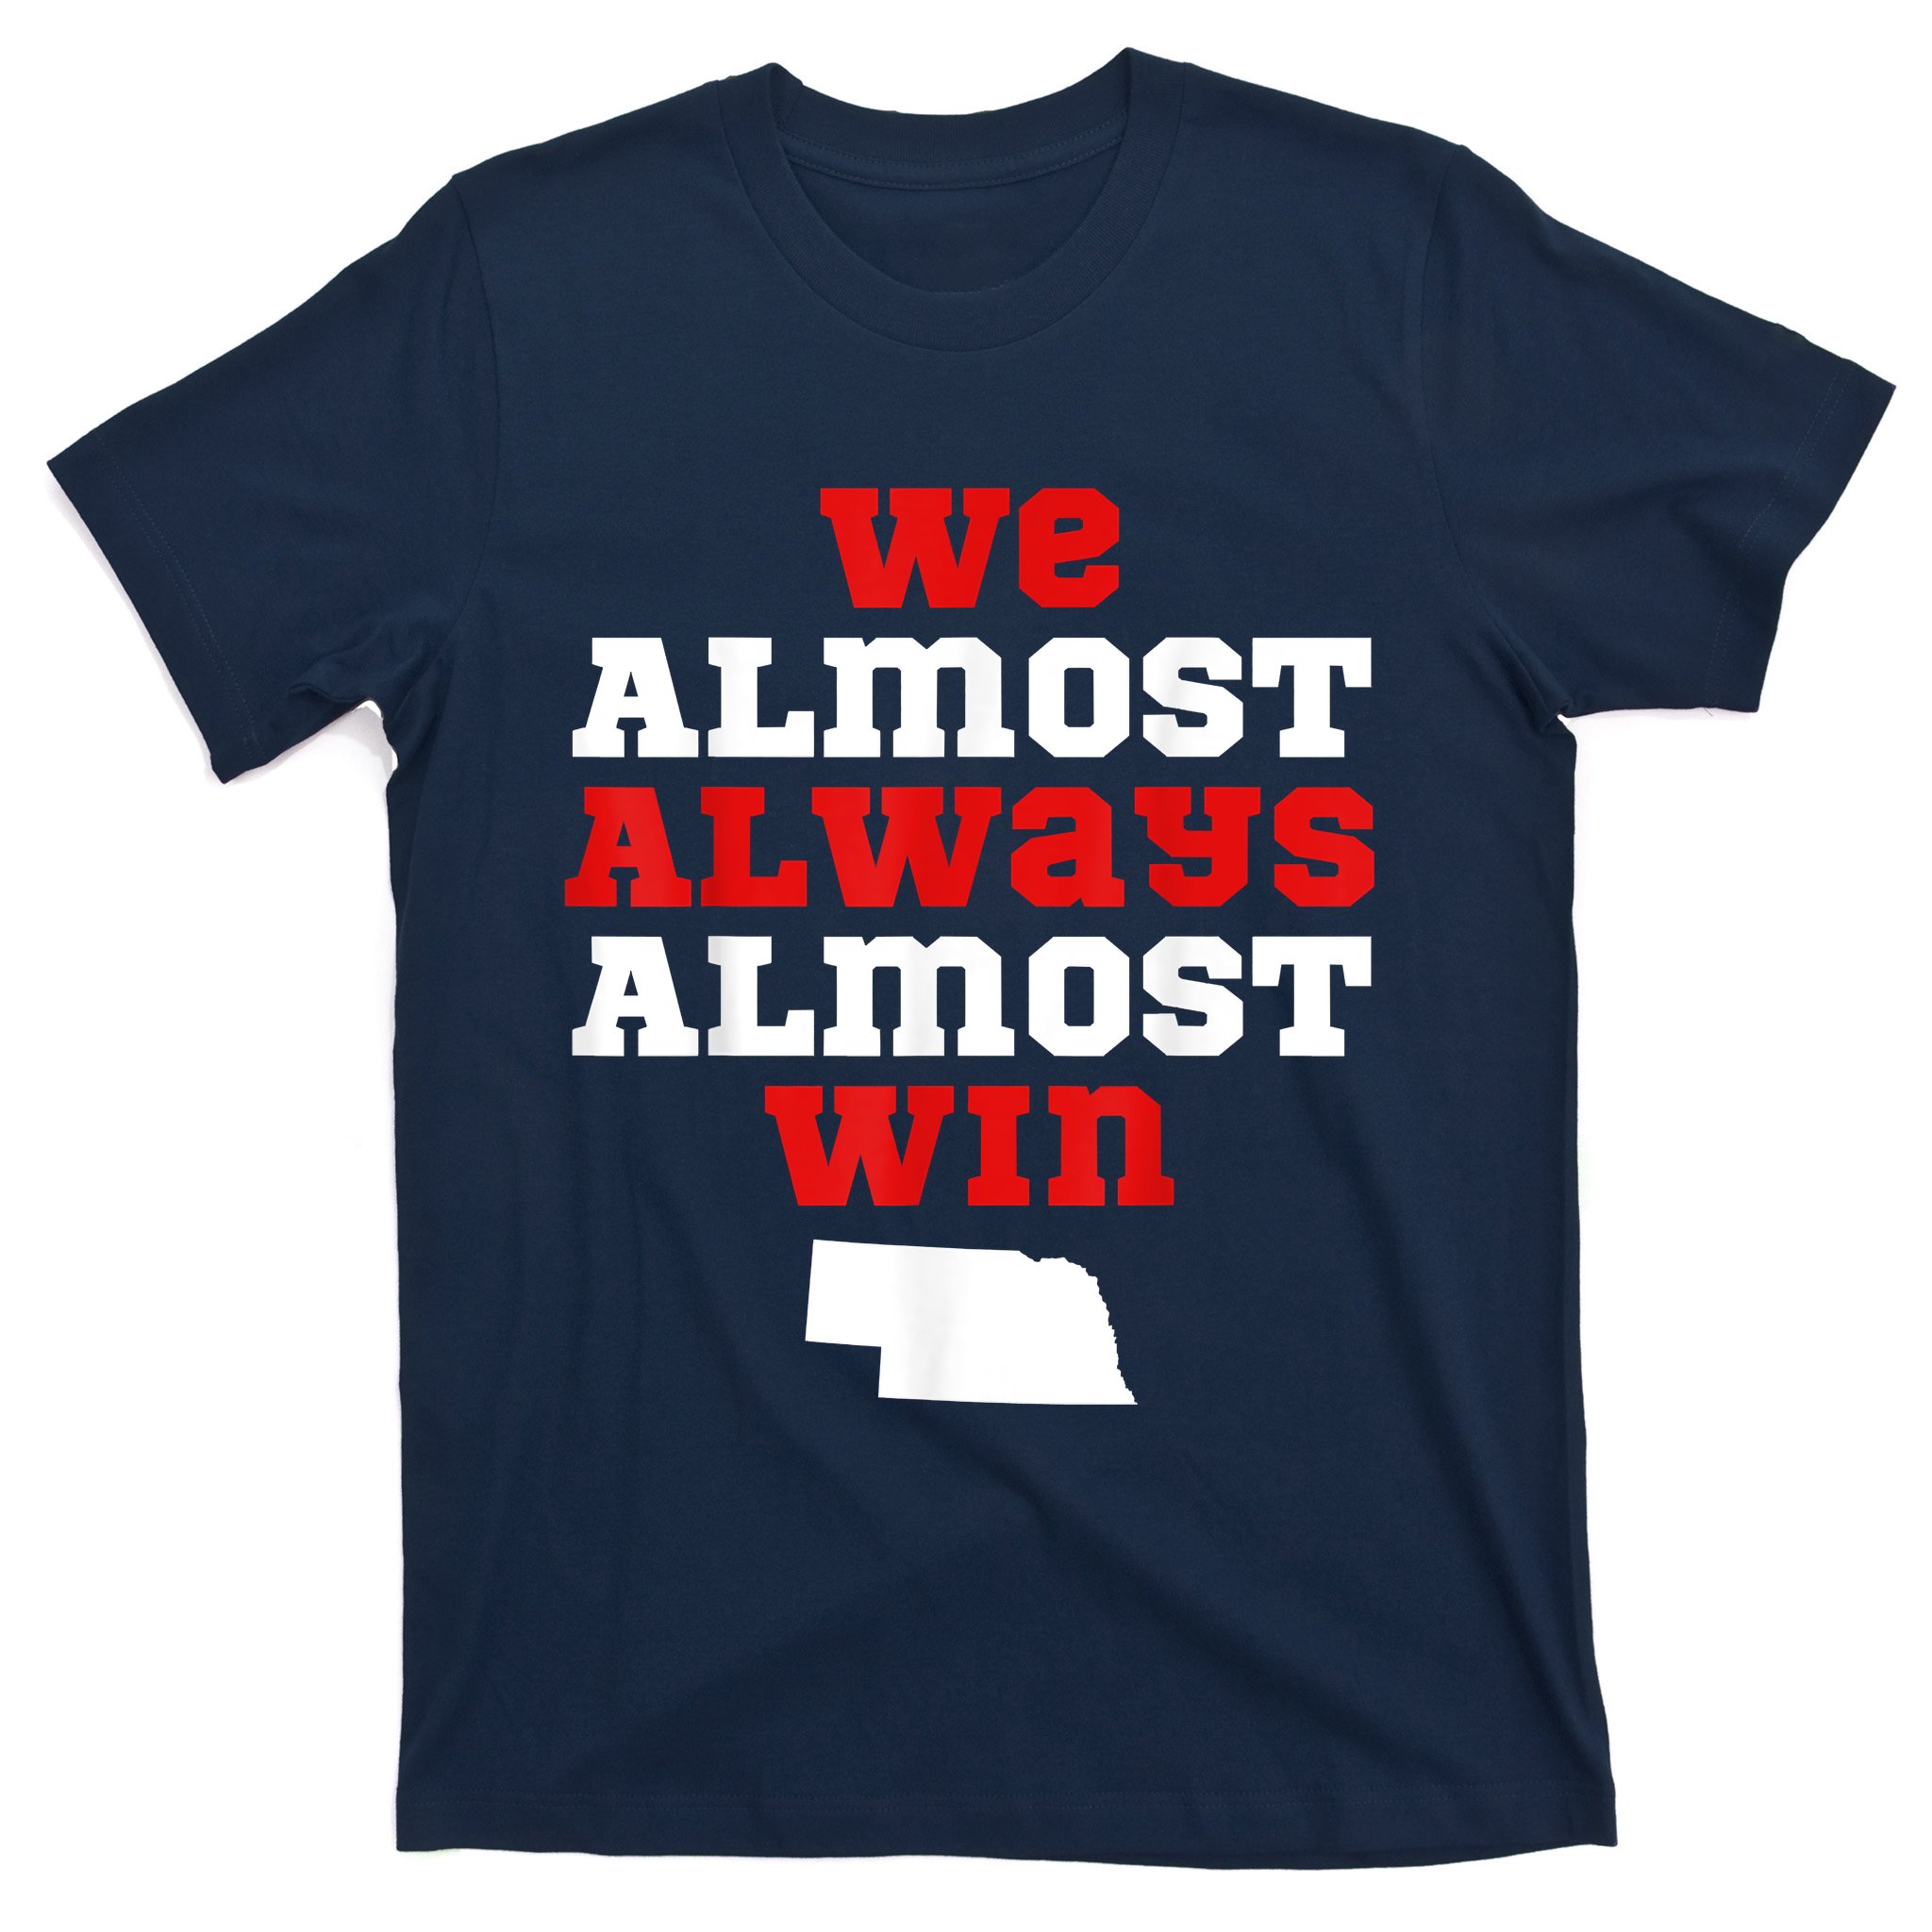 We Almost Always Almost Win Shirt Funny Los Angeles Chargers 